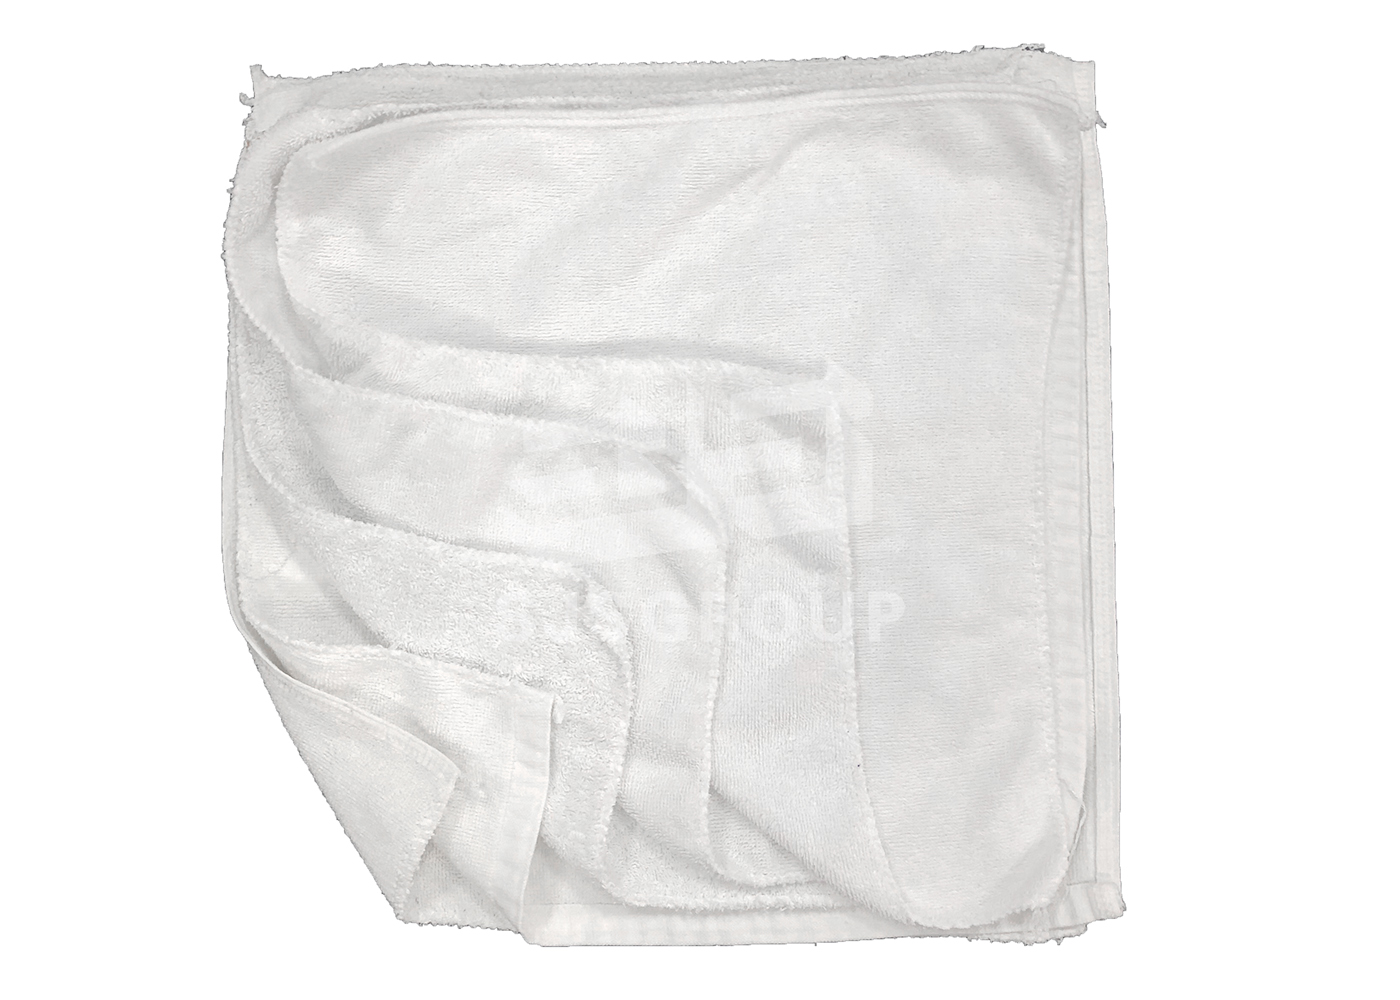 White Towel Rags - White Little Square Towel Cotton Rags(Sewing)